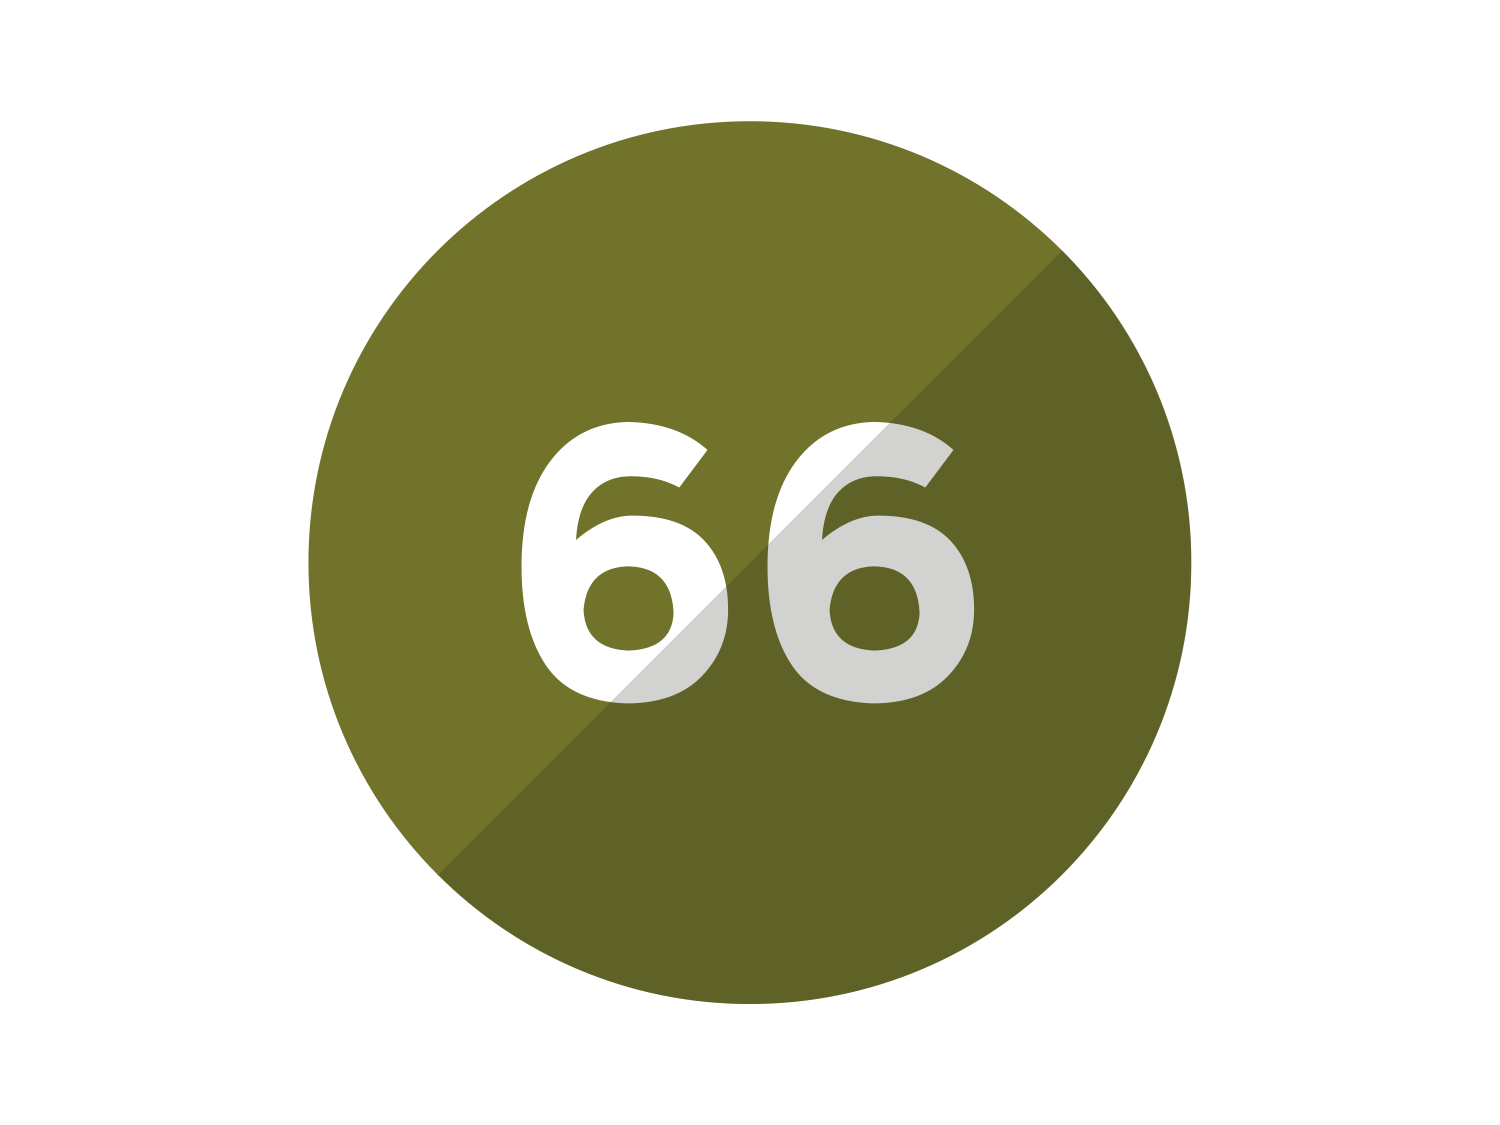 Numerology Meaning of Number 66